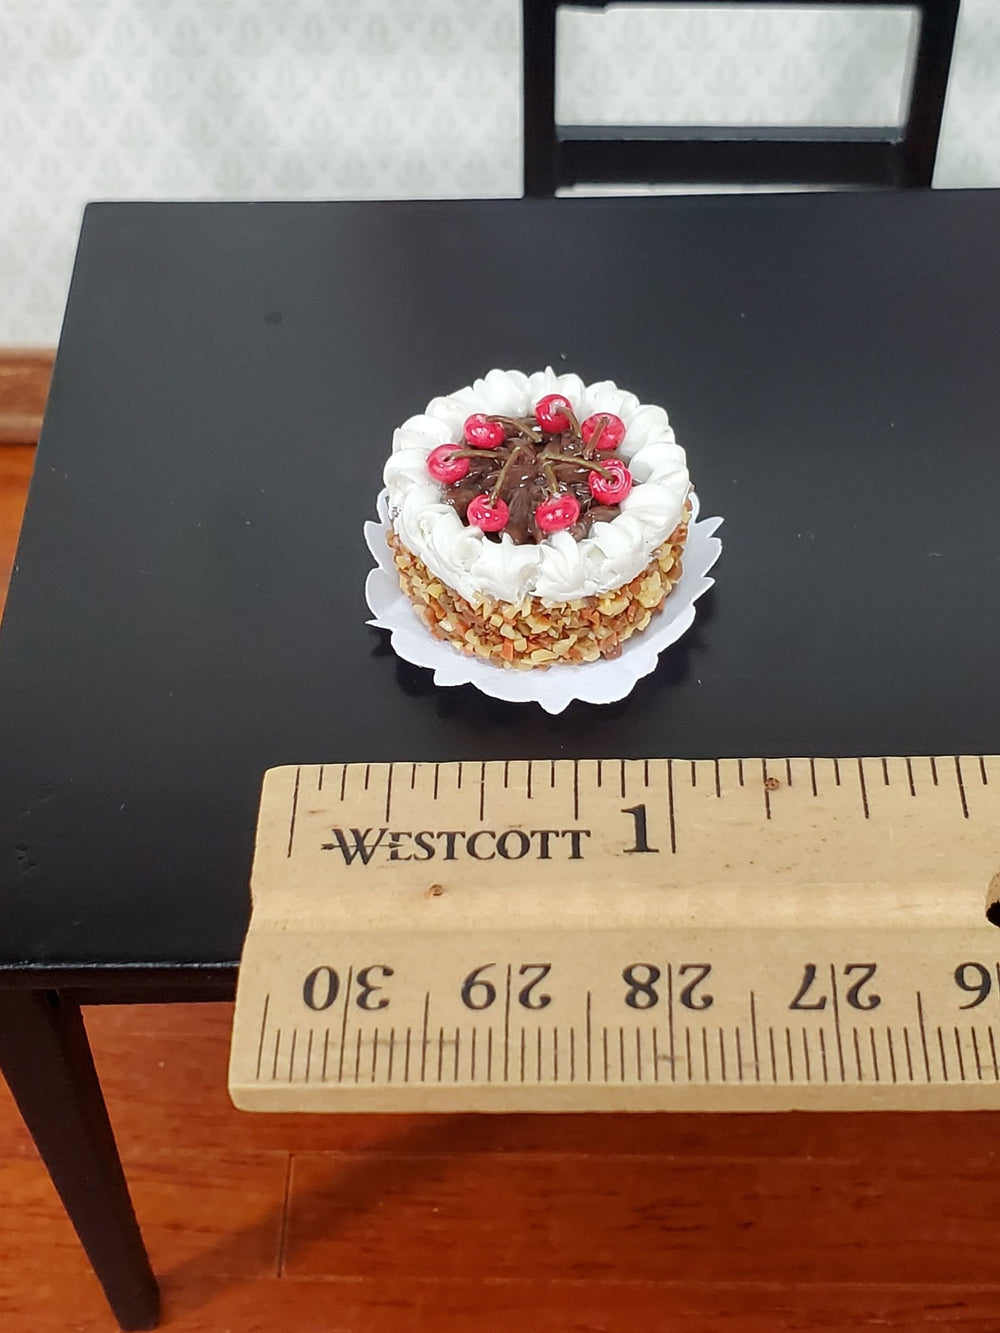 Dollhouse Cake Round Chocolate Cherry with Nuts 1:12 Scale Miniature Food Bakery - Miniature Crush